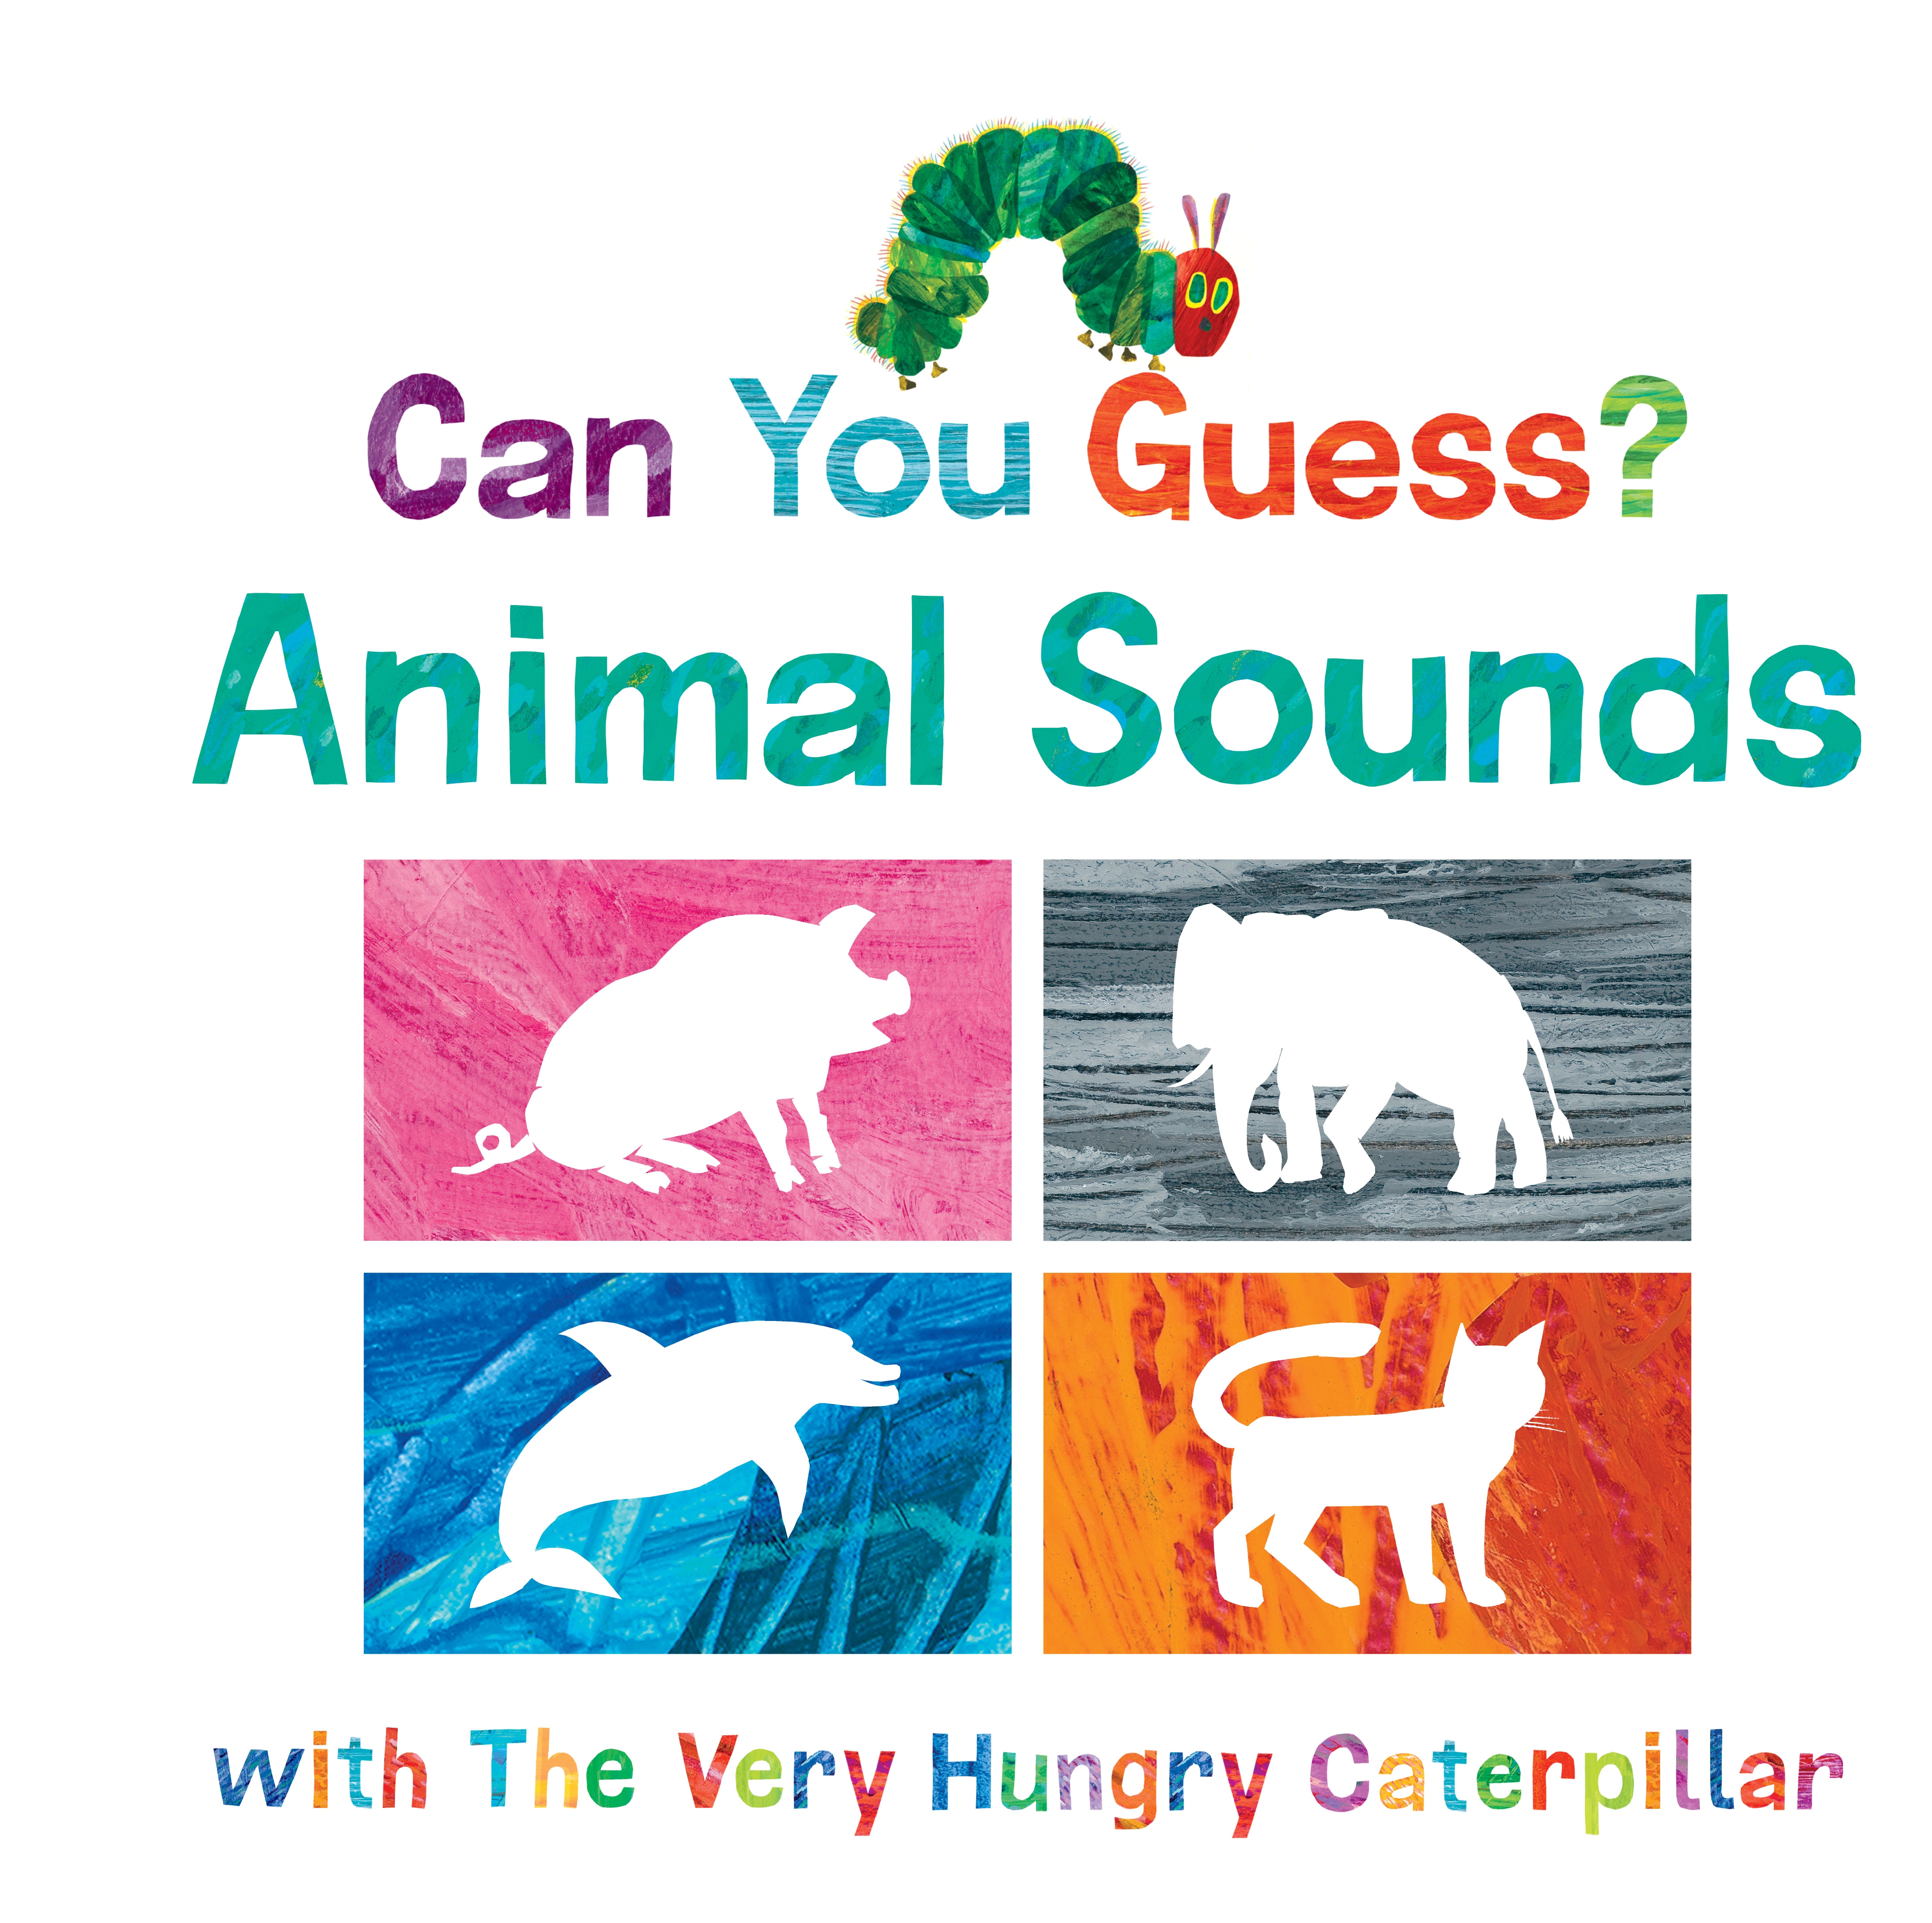 Can You Guess? Animal Sounds with The Very Hungry Caterpillar by Eric Carle  - Penguin Books Australia